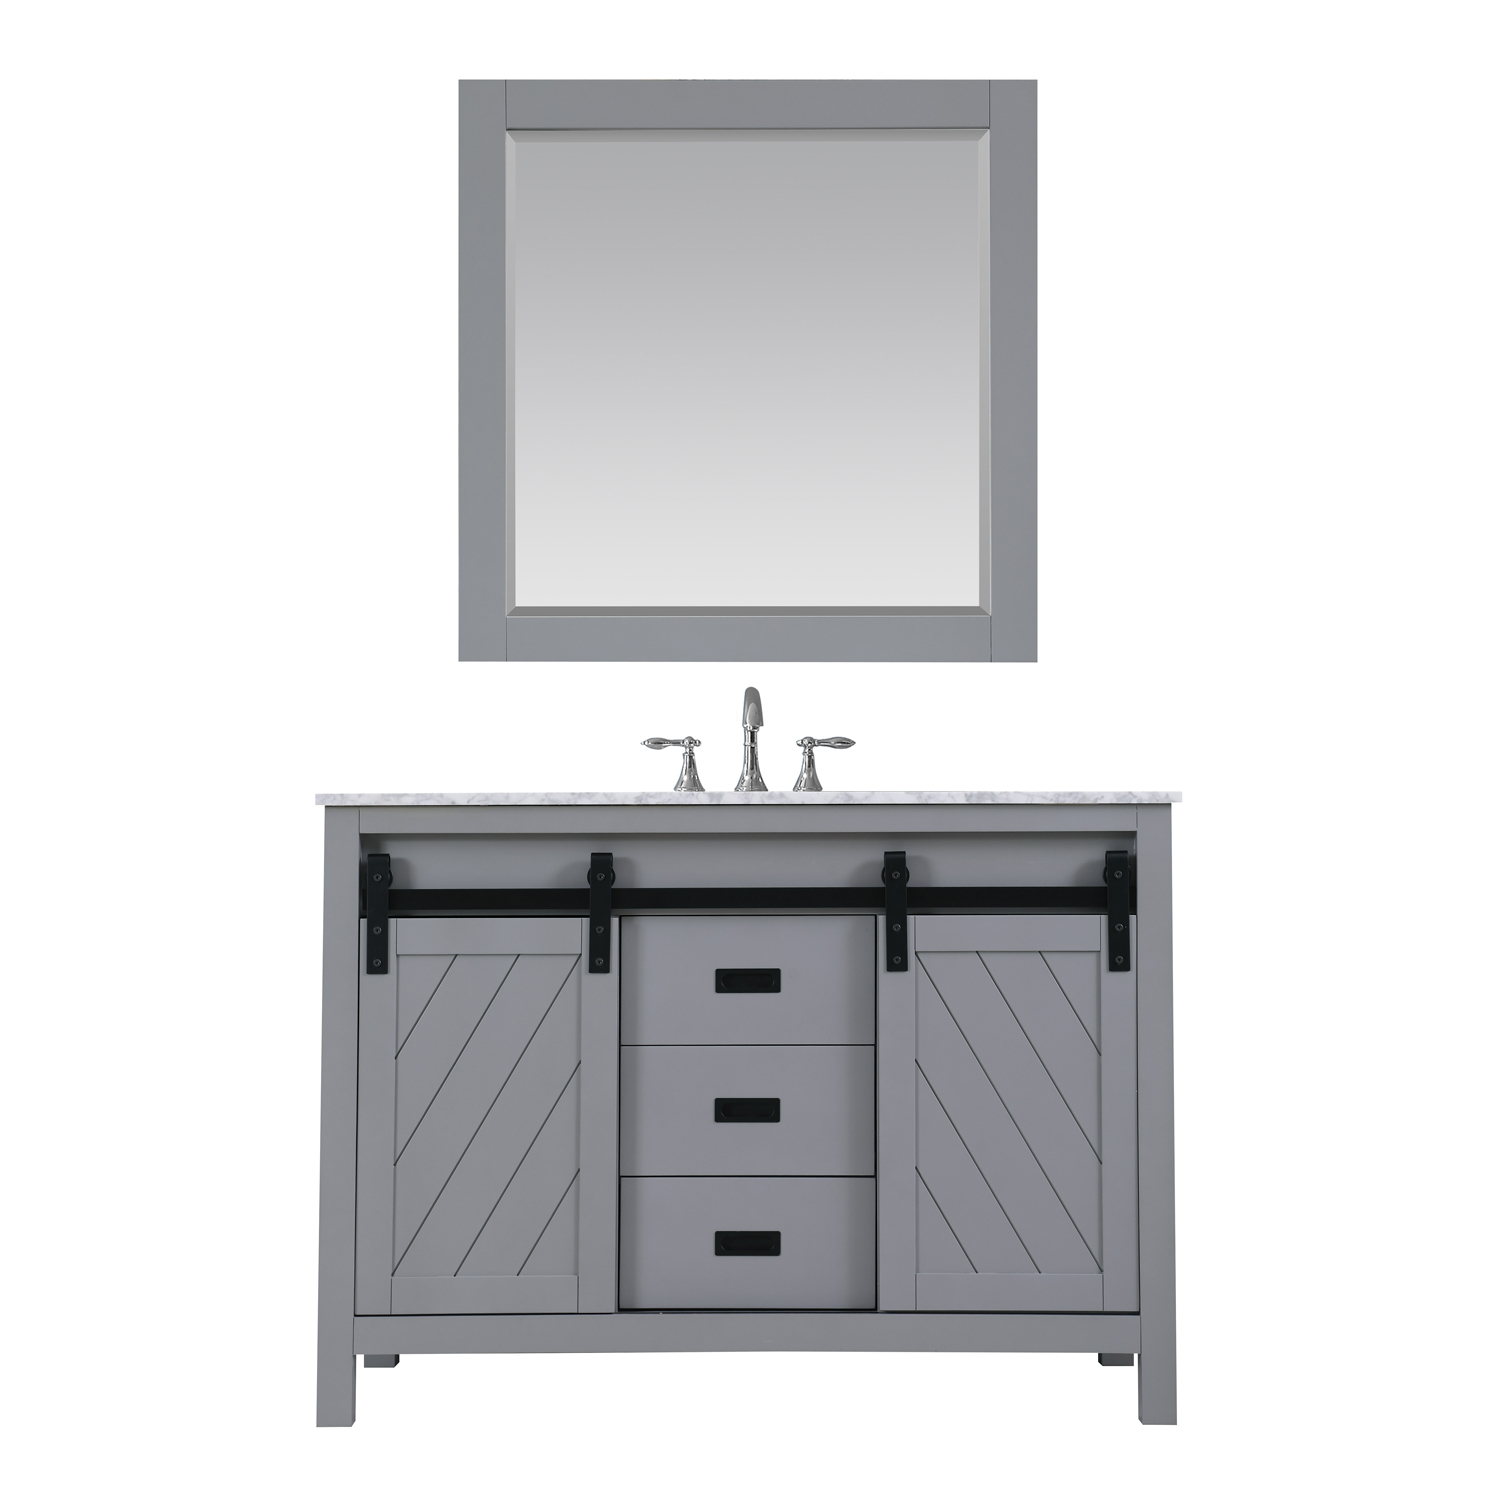 Issac Edwards Collection 48" Single Bathroom Vanity Set in Gray and Carrara White Marble Countertop without Mirror 